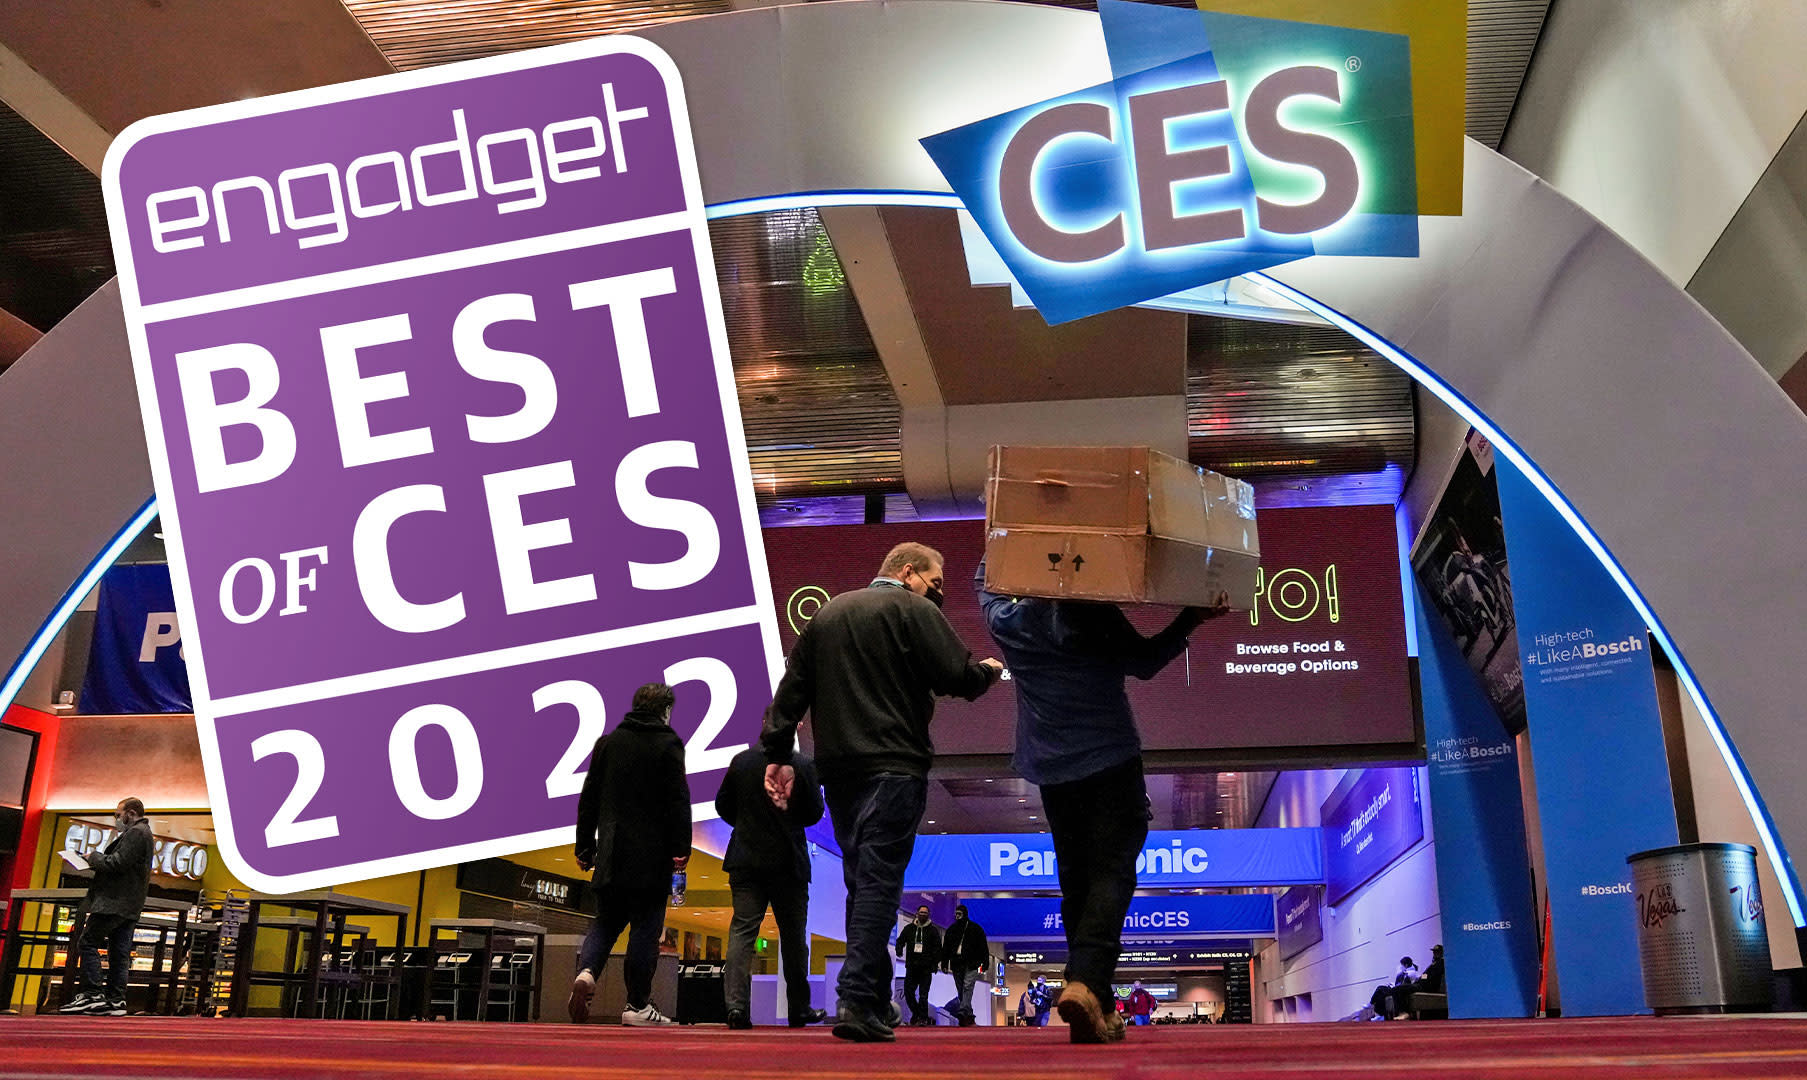 Engadget Best of CES 2022